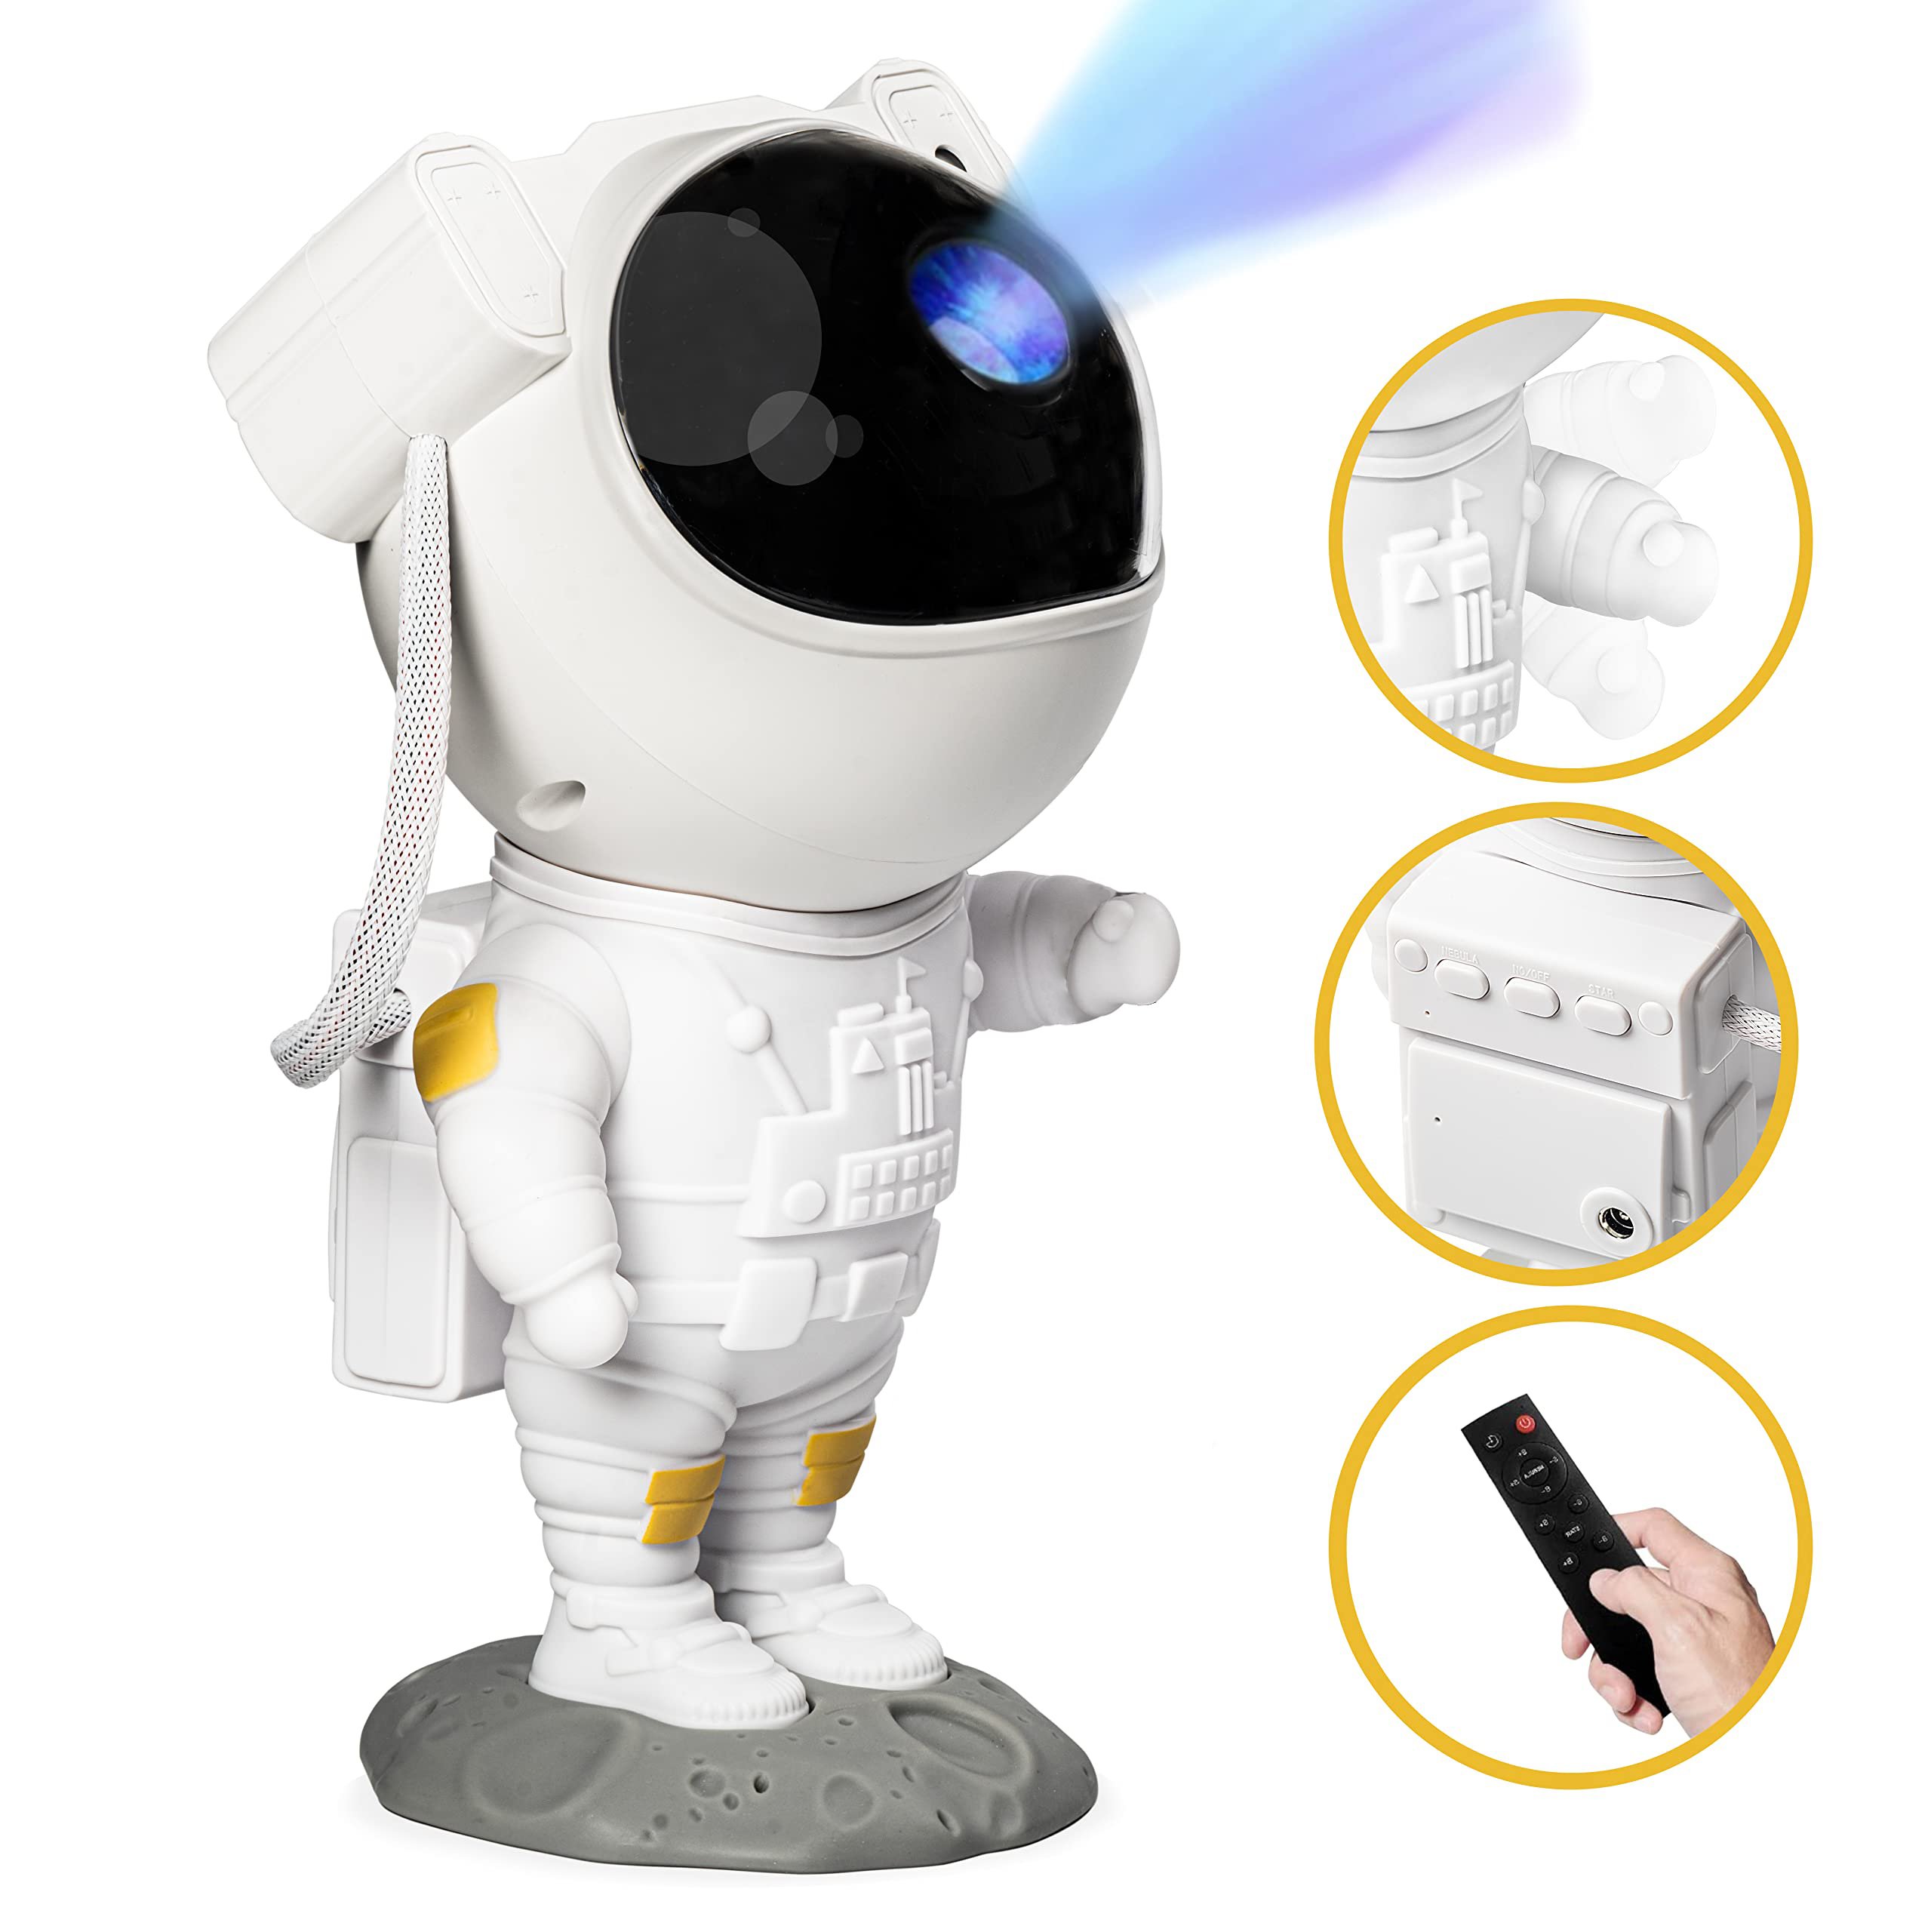 🎁Astronaut Star Galaxy Projector Light - With Timer and Remote (🔥 LIMITED TIME FREE SHIPPING🔥)